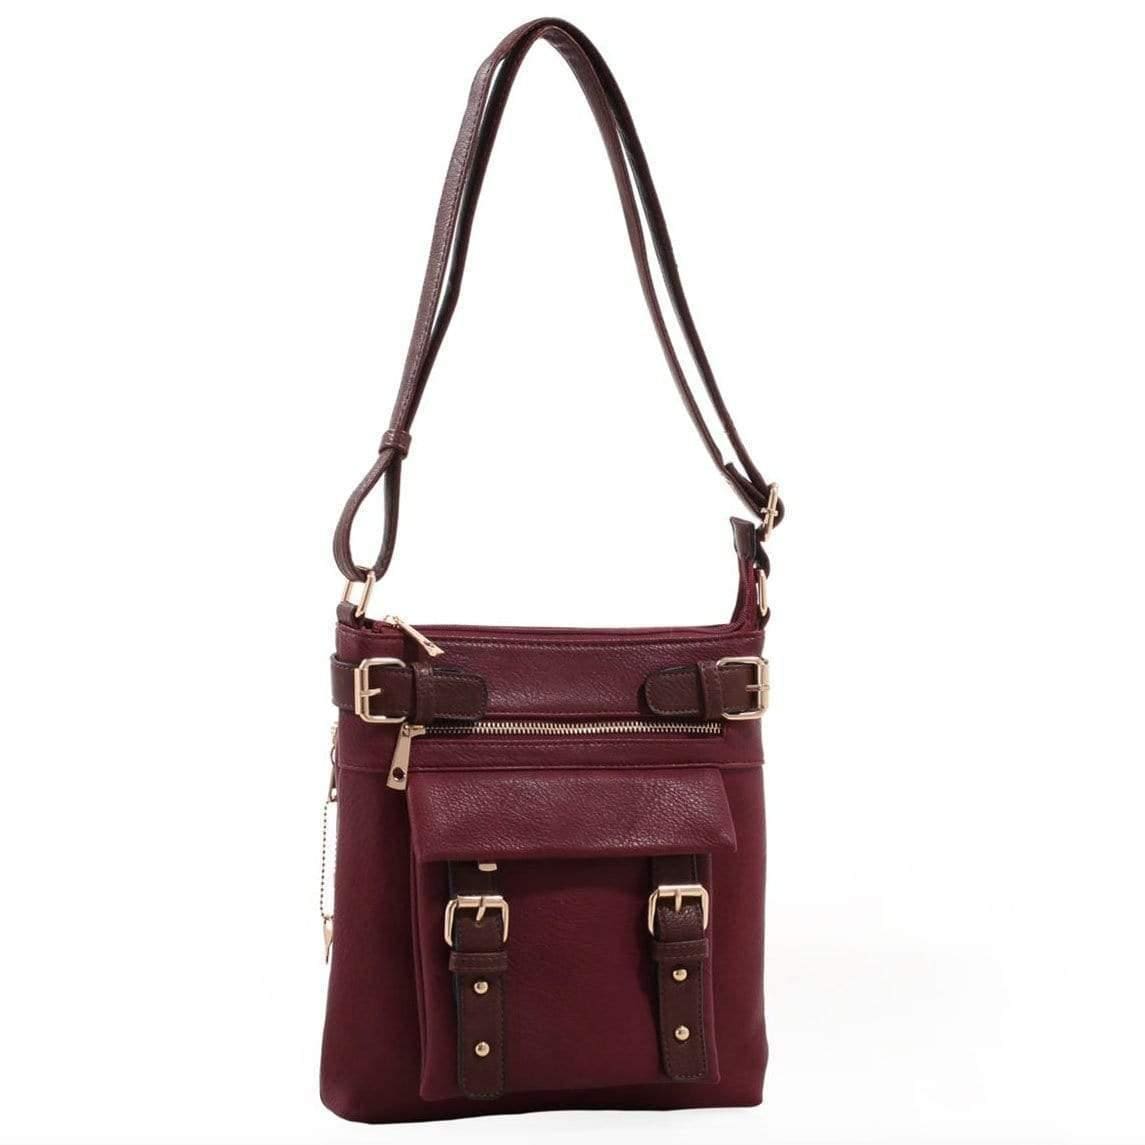 Emperia Outfitters Concealed Carry Hannah Crossbody Bag by Jessie James Concealed Carry Hannah Crossbody Bag by Jessie James